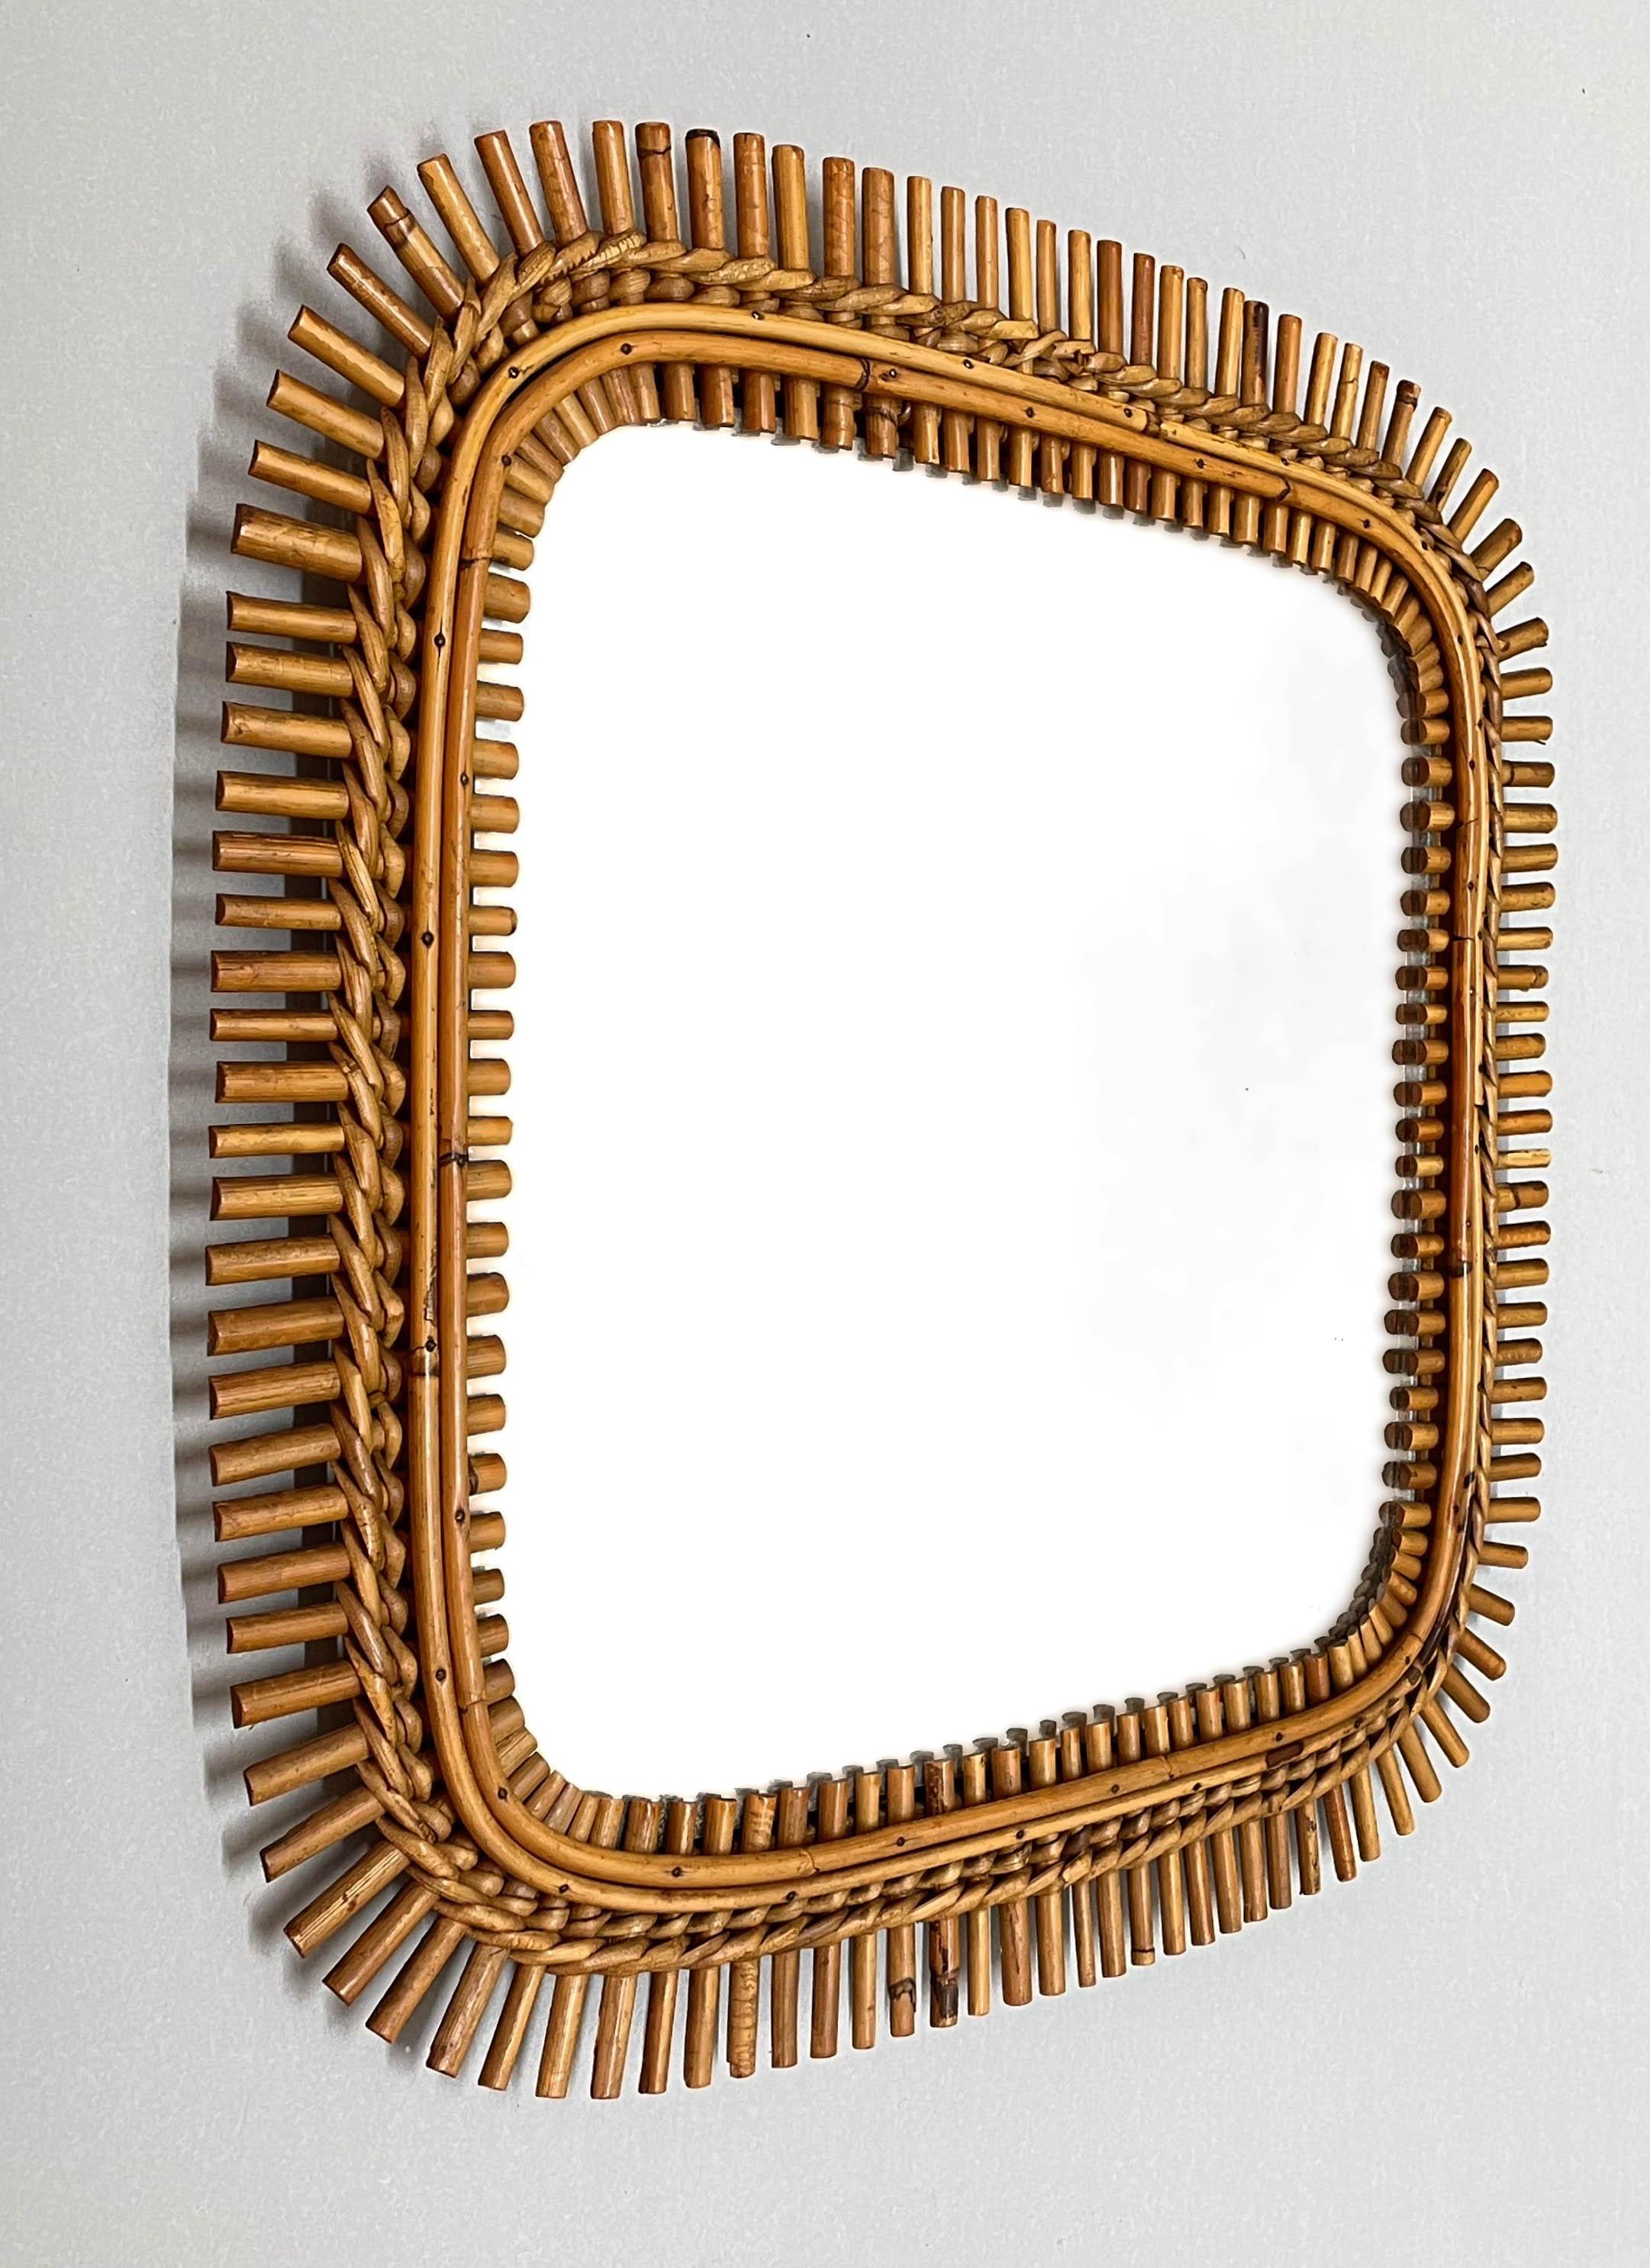 Wonderful Cote d'Azur square midcentury wall mirror with bamboo and rattan frame. It is attributed to the craftmanship of Franco Albini and was designed in France during 1960s.

This amazing mirror is in its original, good vintage conditions. It